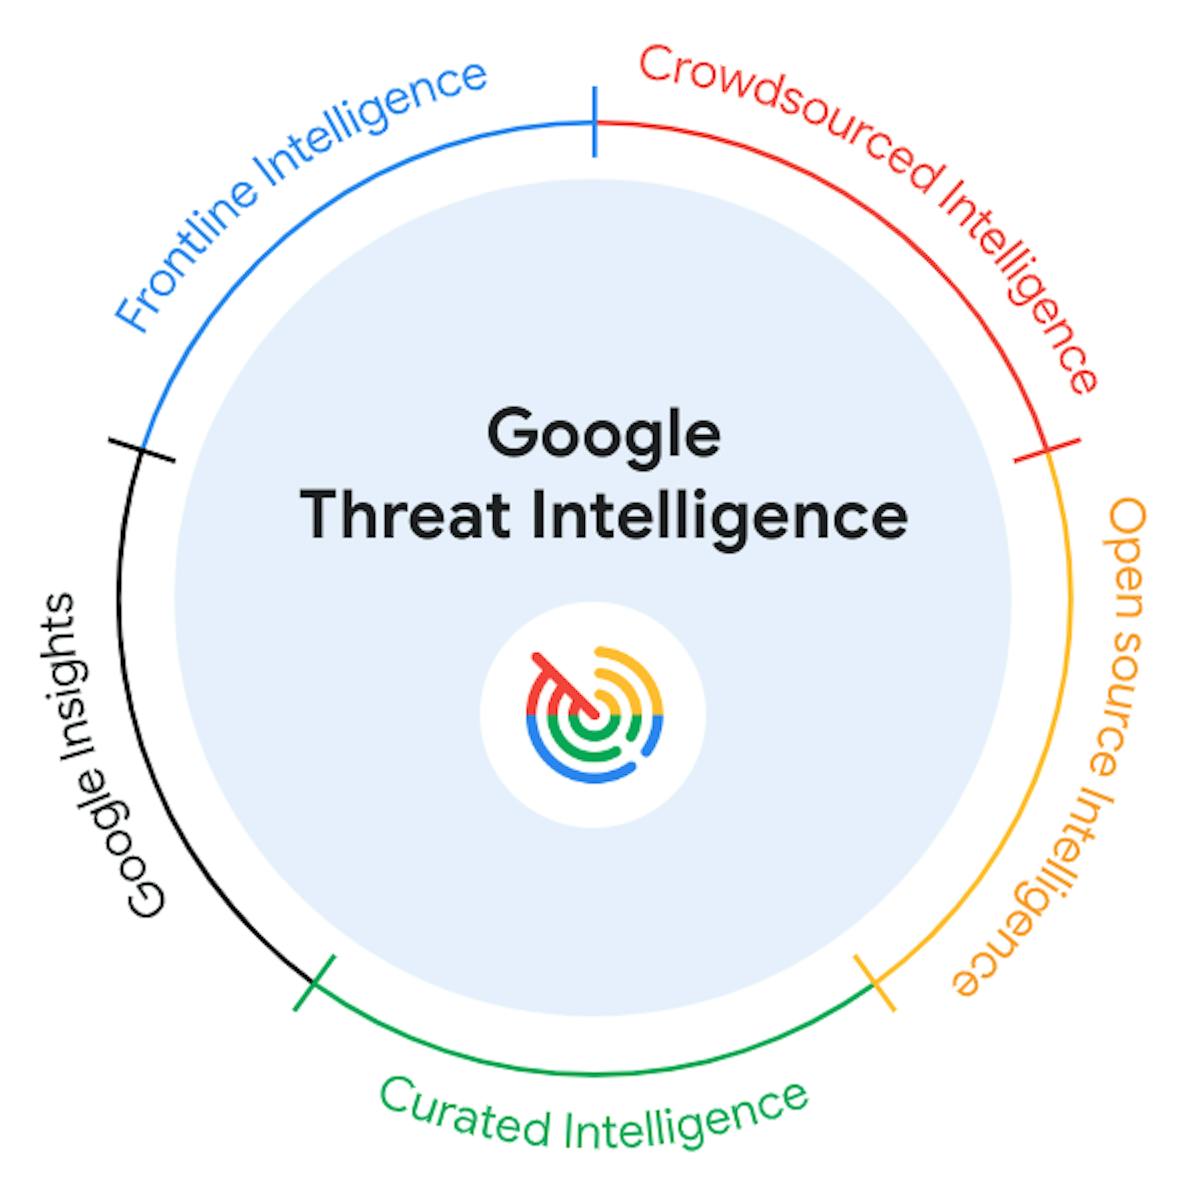 Google Threat Intelligence boasts a diverse set of sources that provide a panoramic view of the global threat landscape and the granular details needed to make informed decisions.